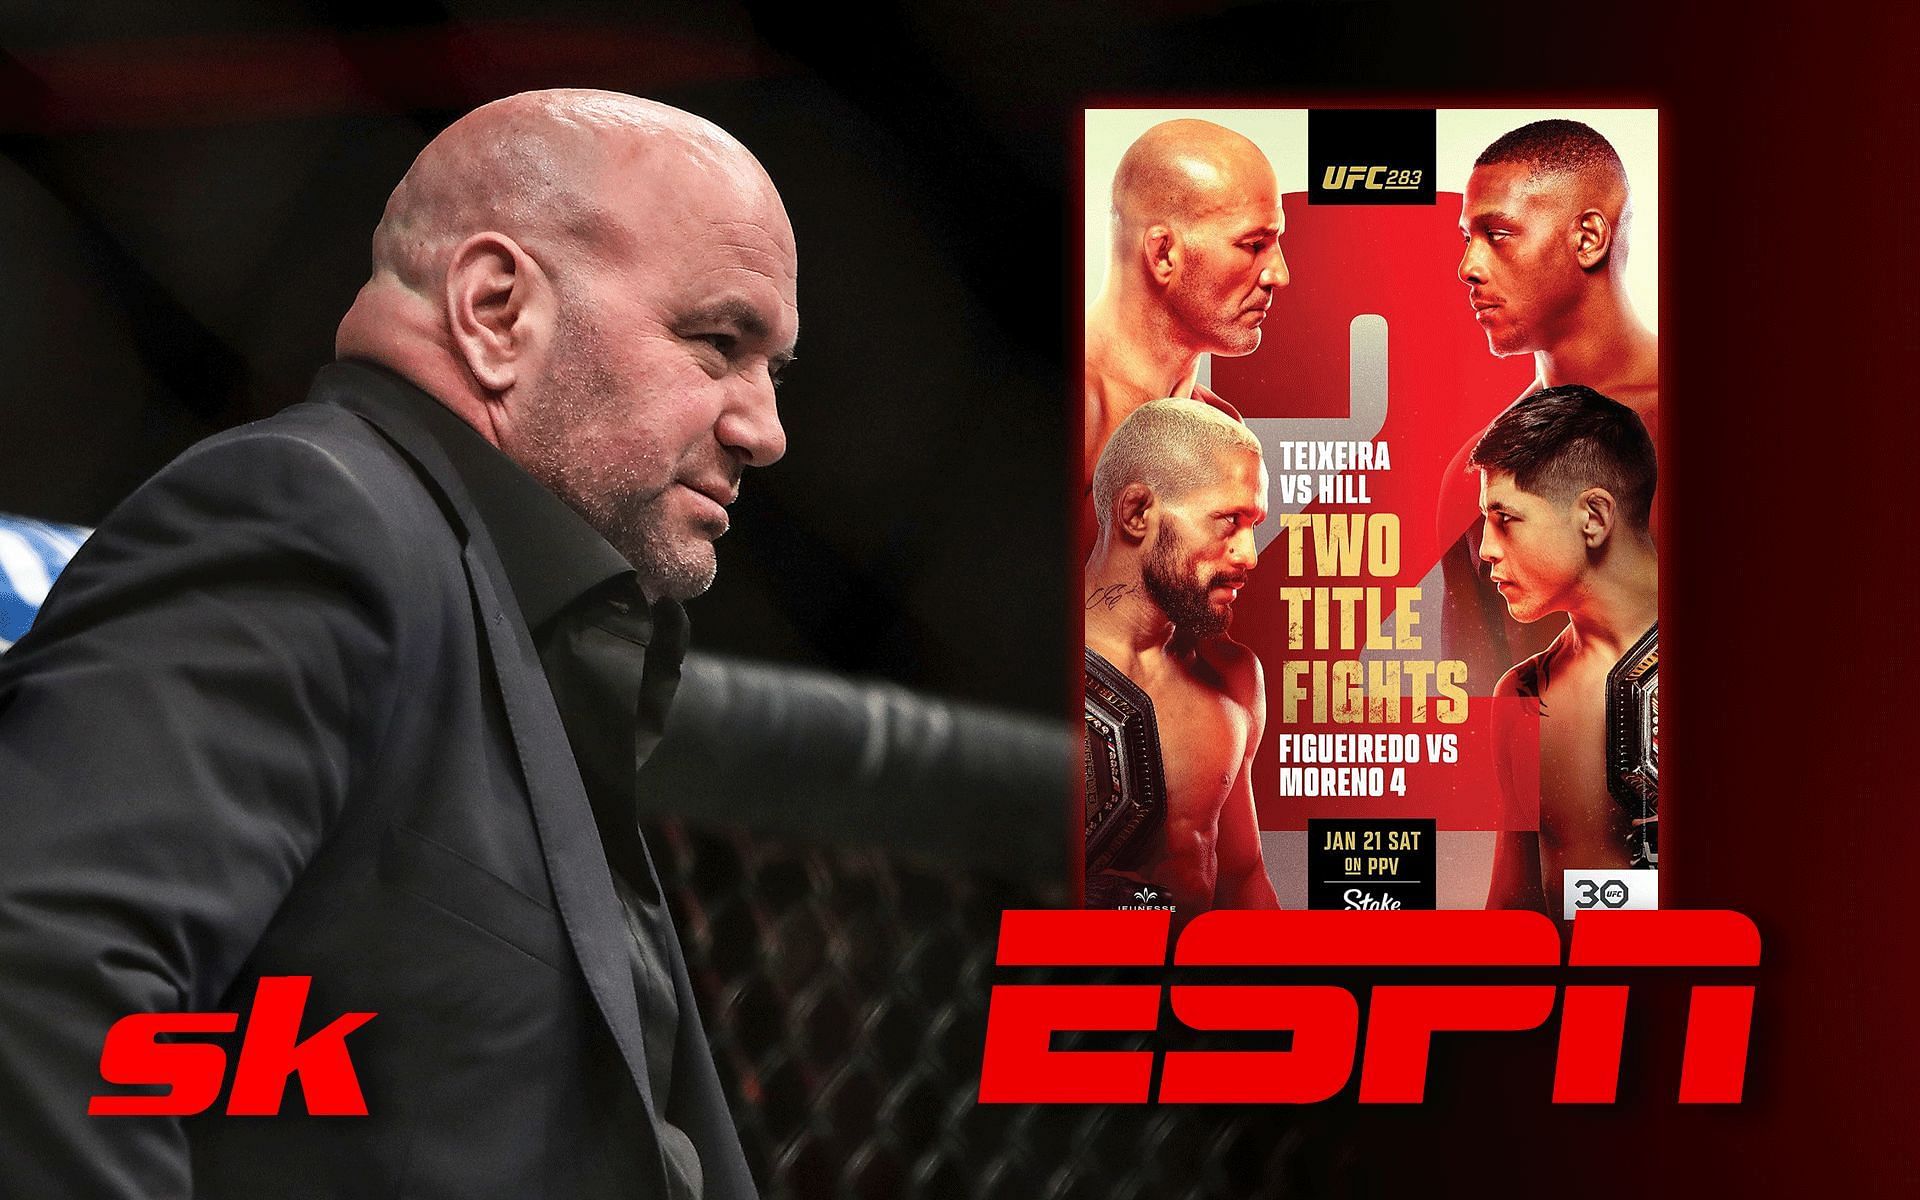 MMA Twitter enraged over ESPN increasing UFC pay-per-views to $79.99